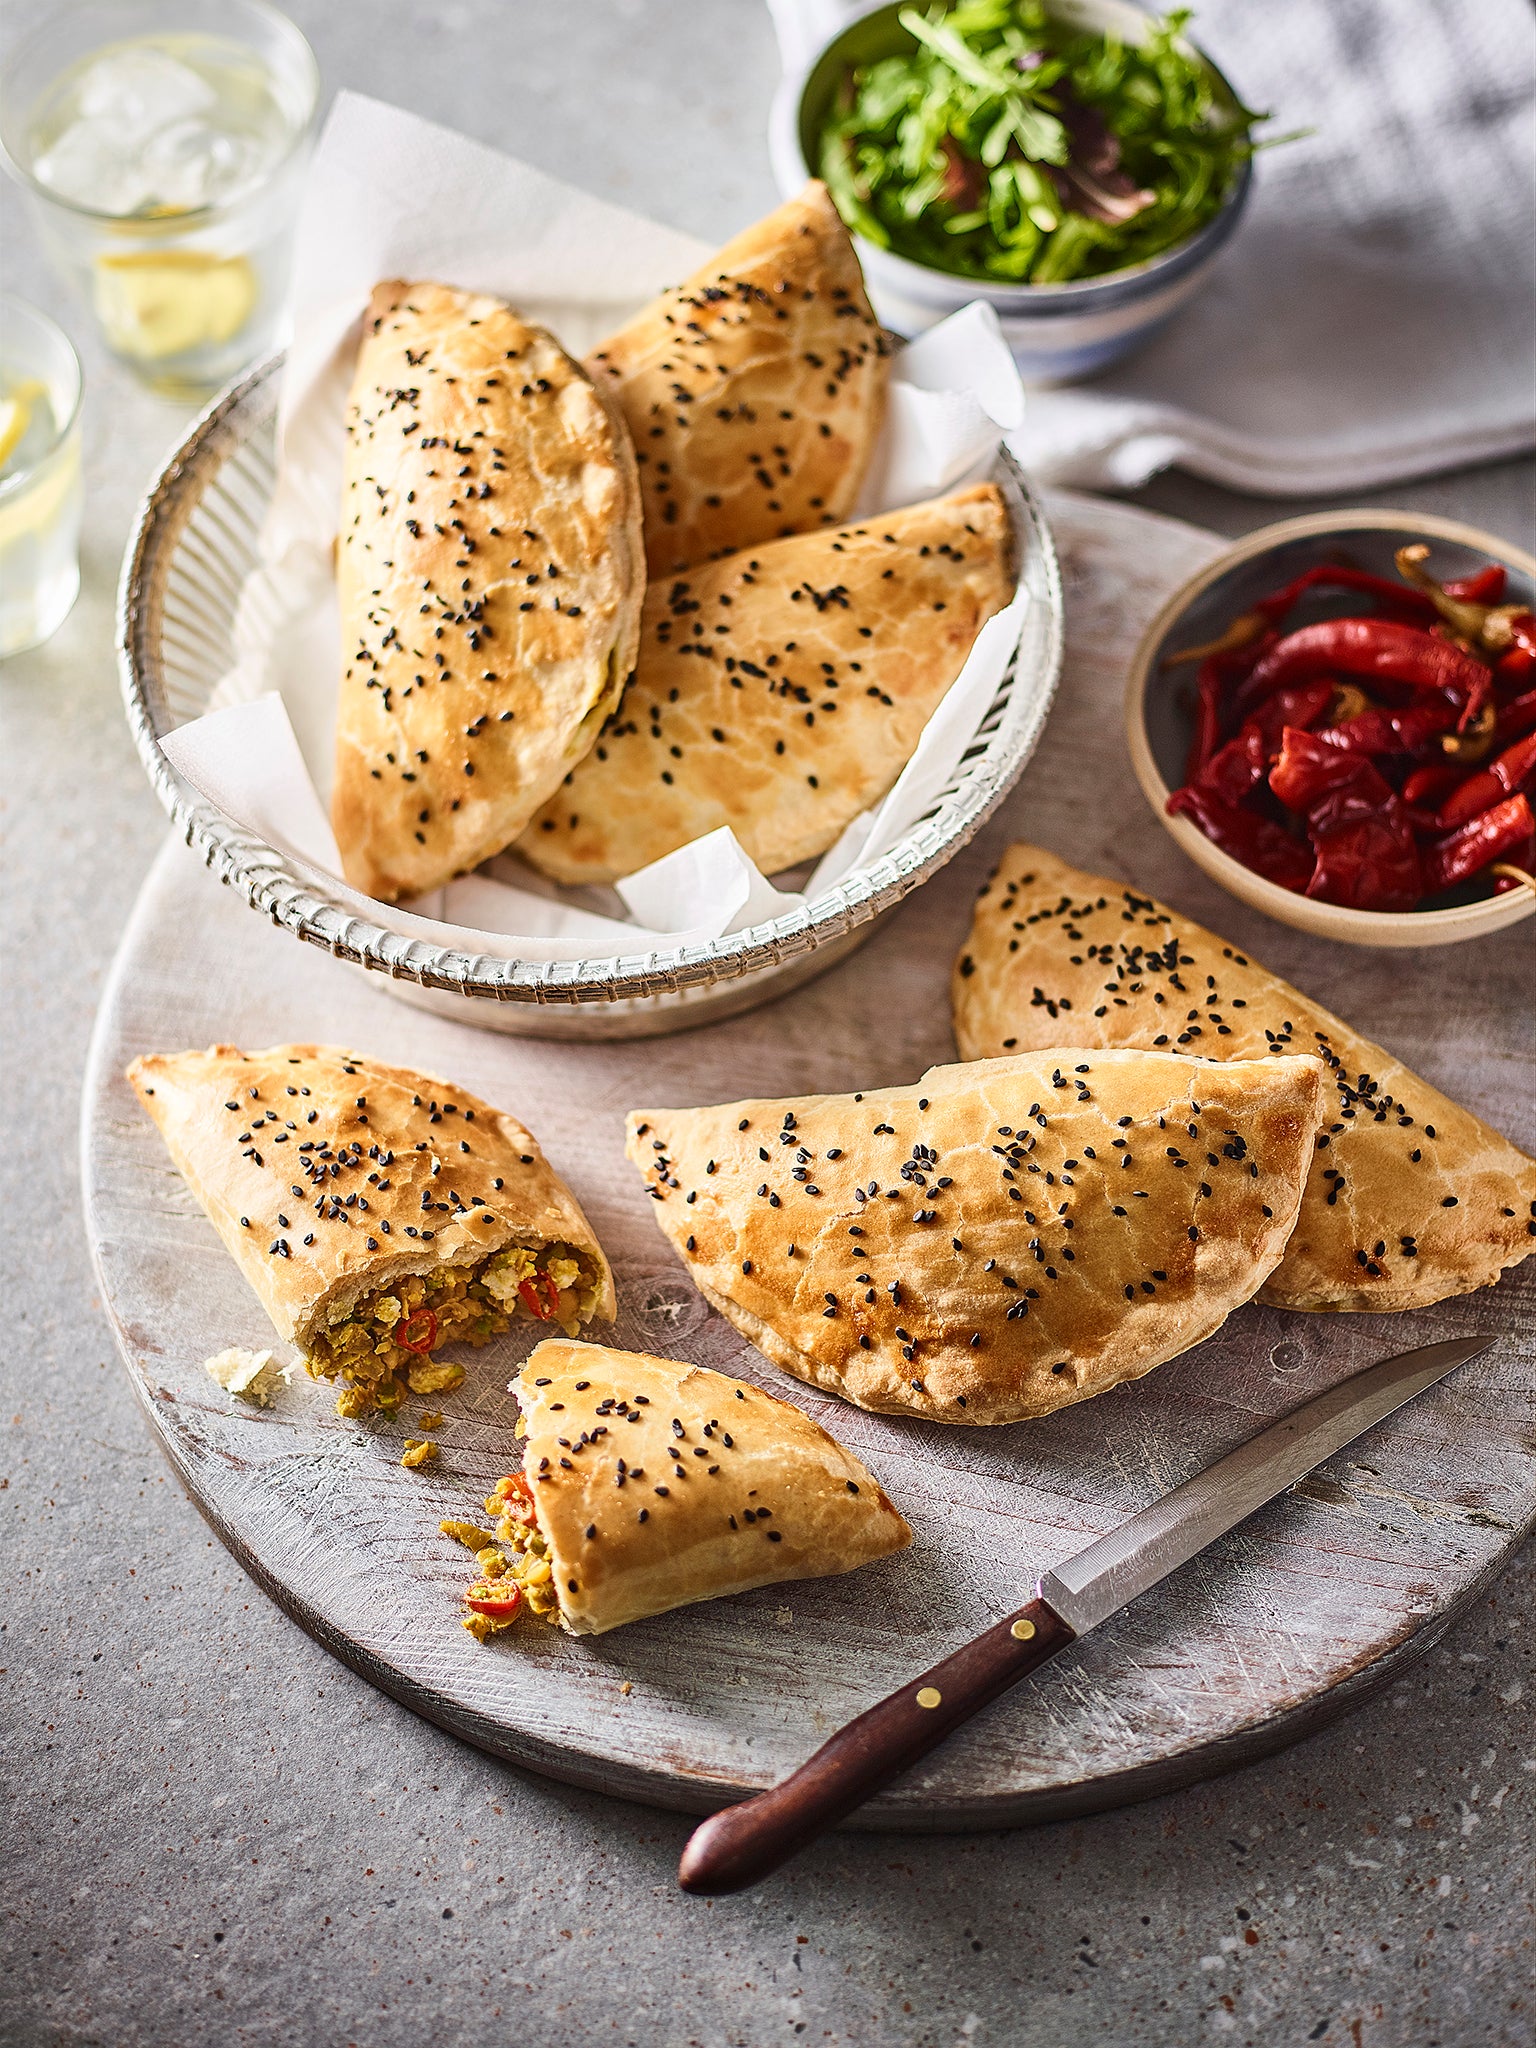 Add a touch of spice to your supper with these golden pasties filled with creamy feta and fragrant curry